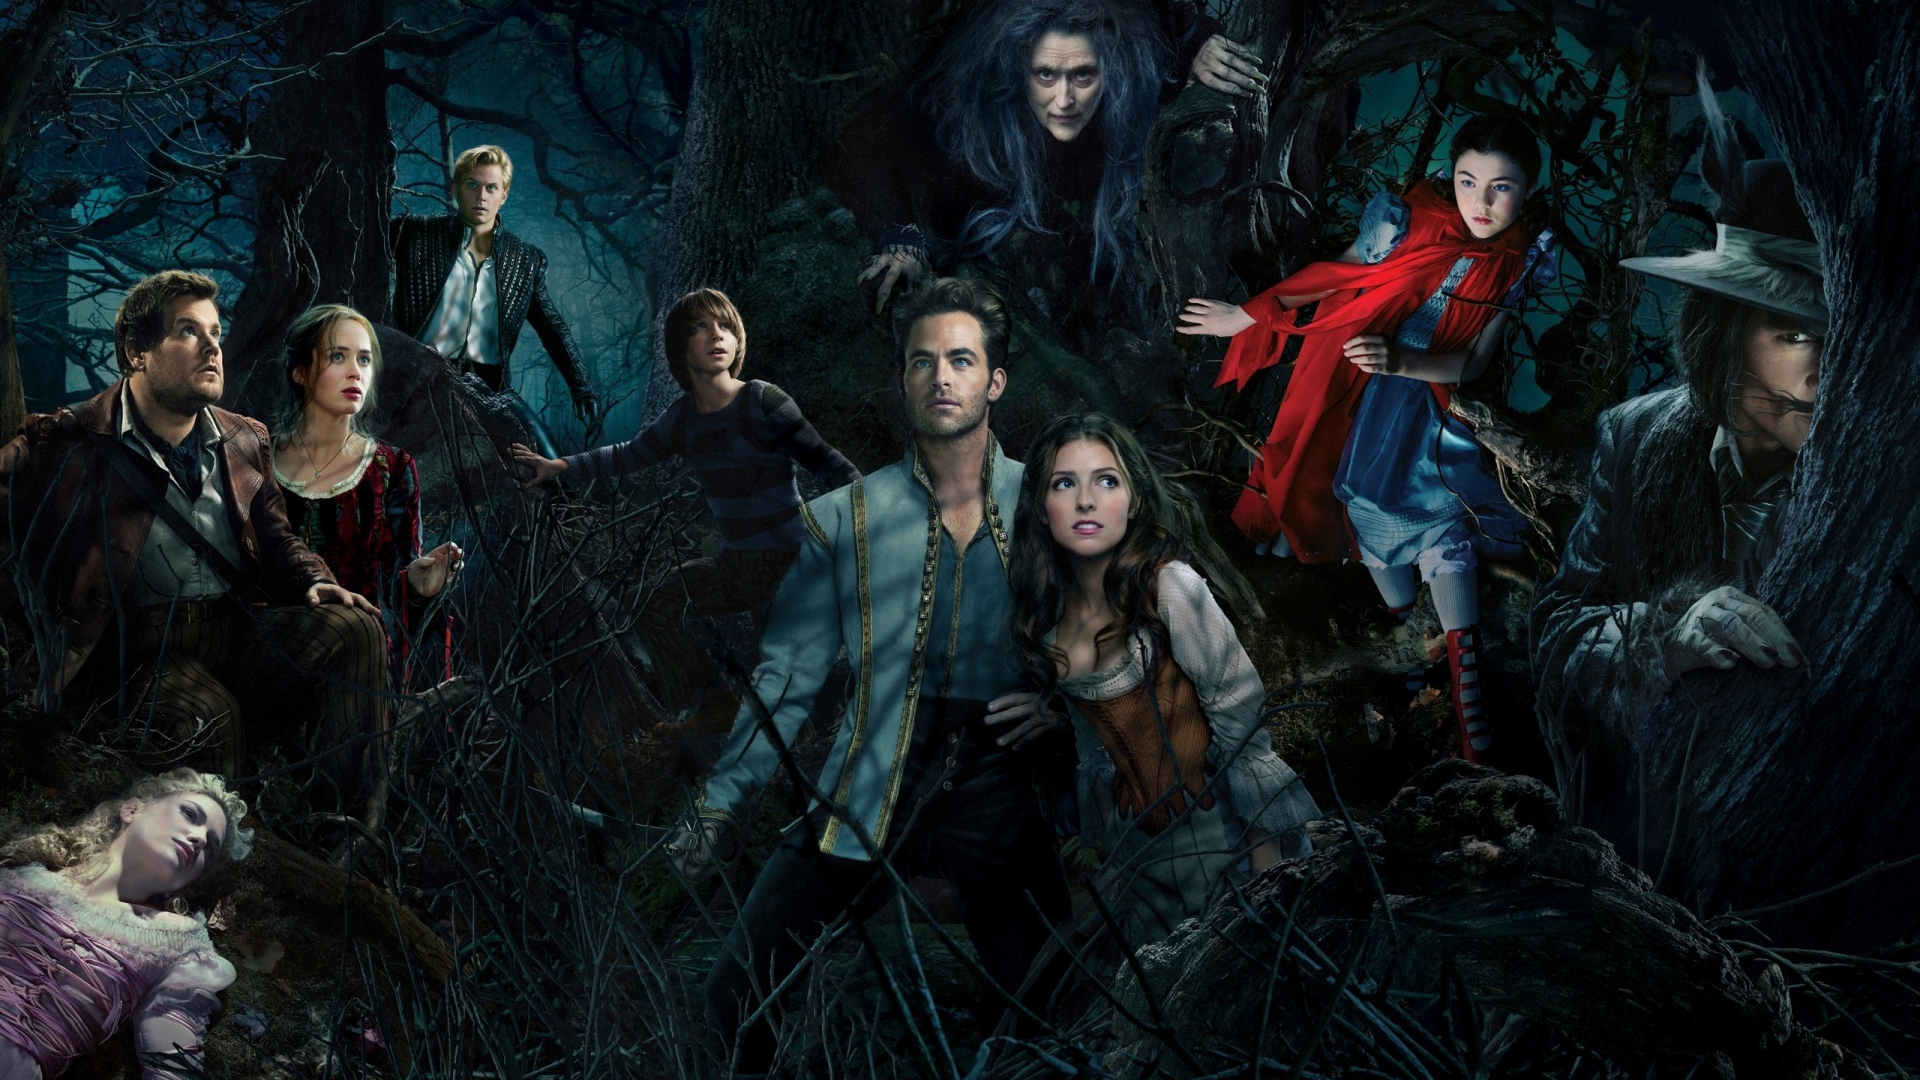 Into the Woods Poster for 1920 x 1080 HDTV 1080p resolution